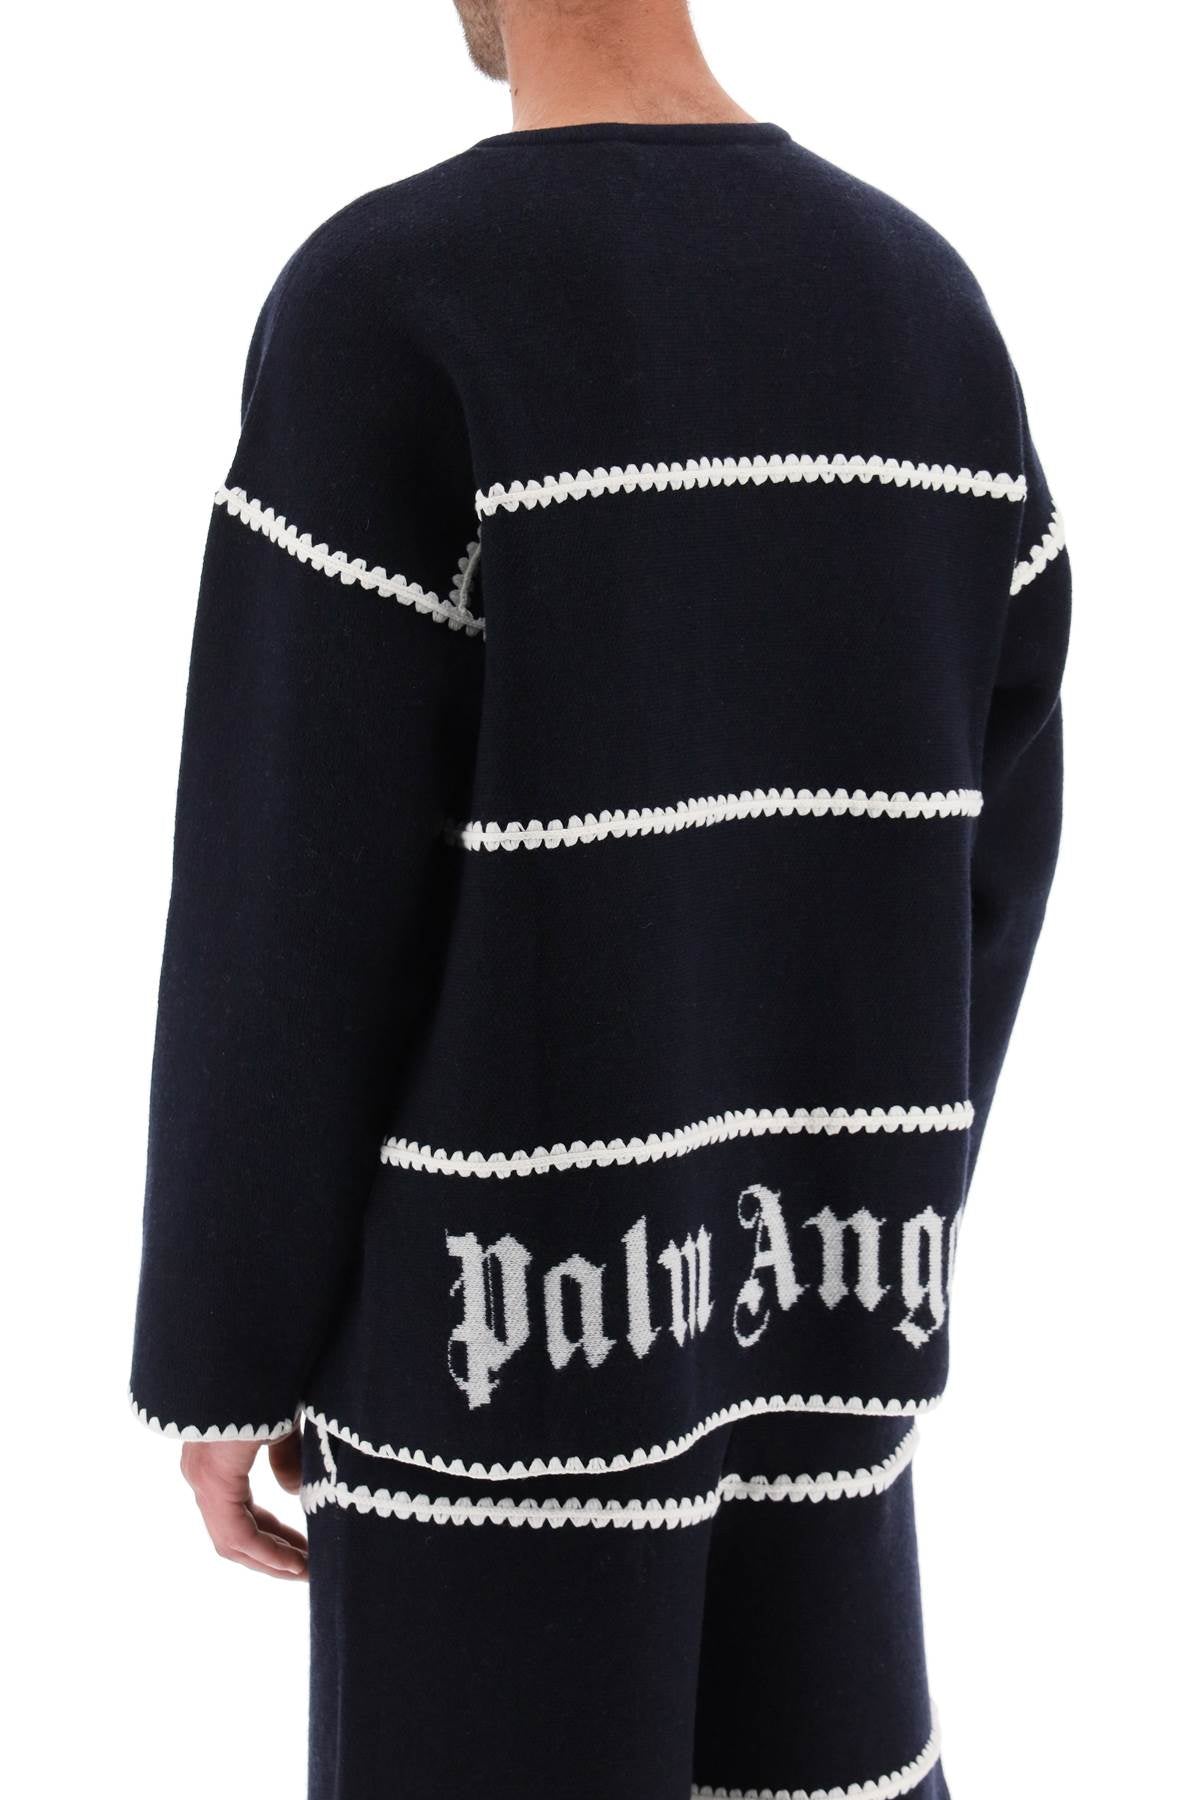 Palm angels embroidered jacquard sweater-2